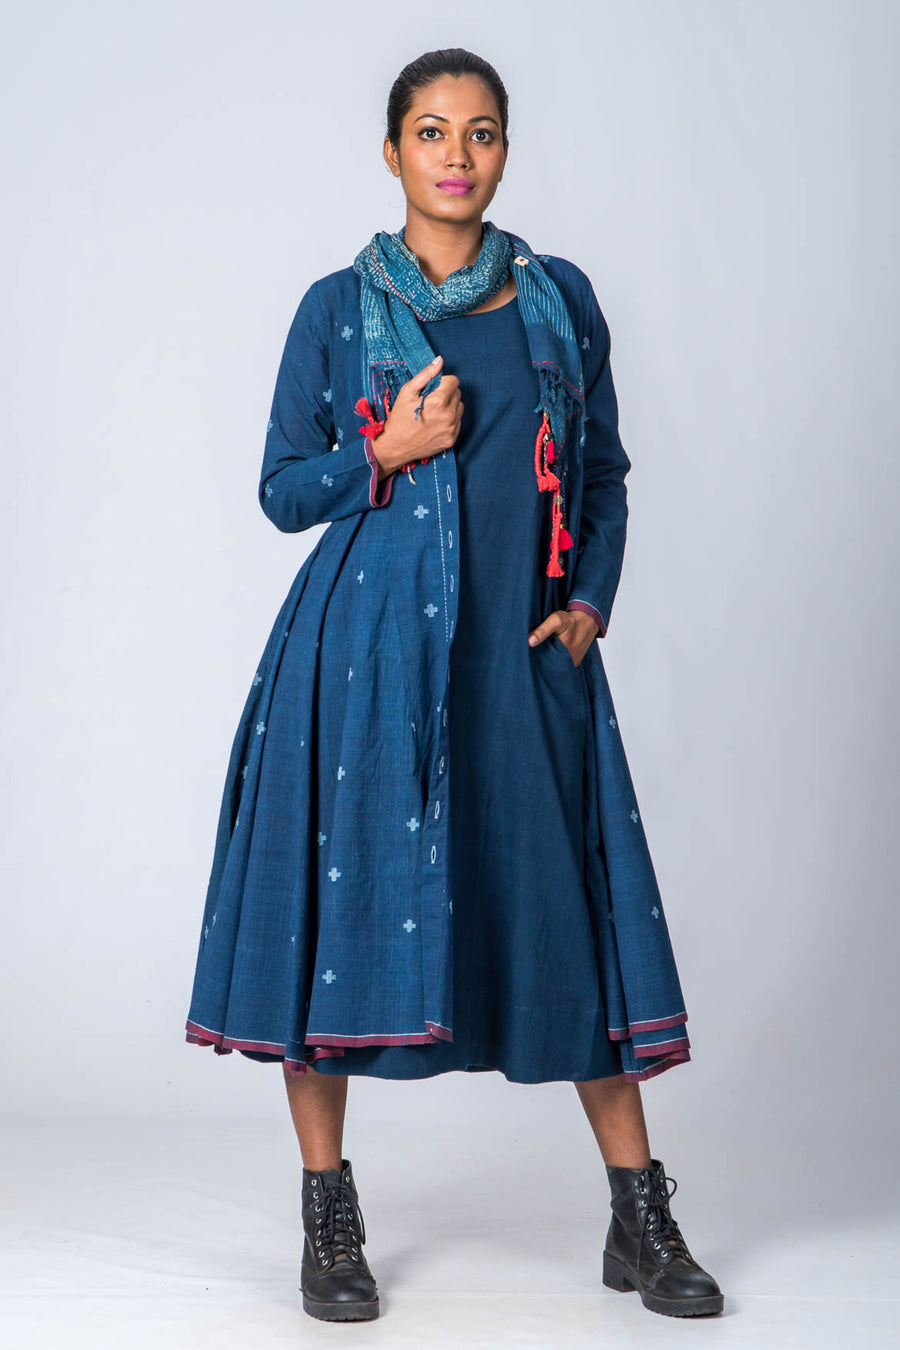 Buy Ethnic Jacket For Women At Best Prices Online In India